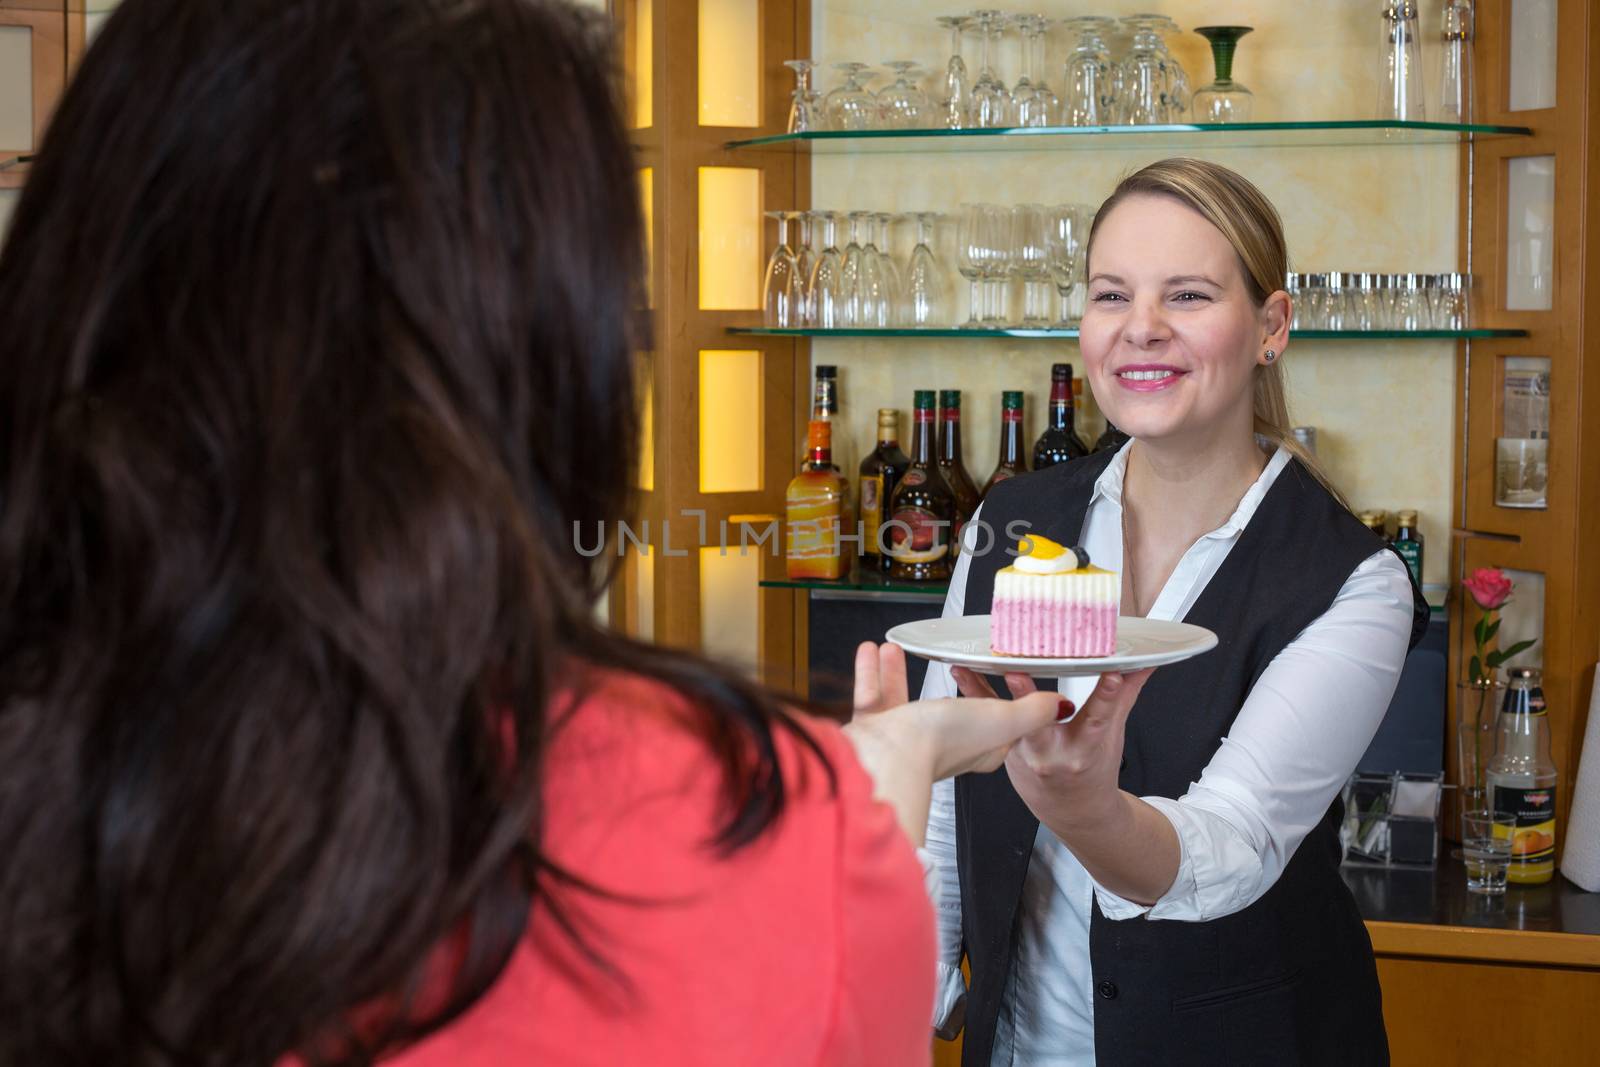 waitress hands a piece of cake to customer